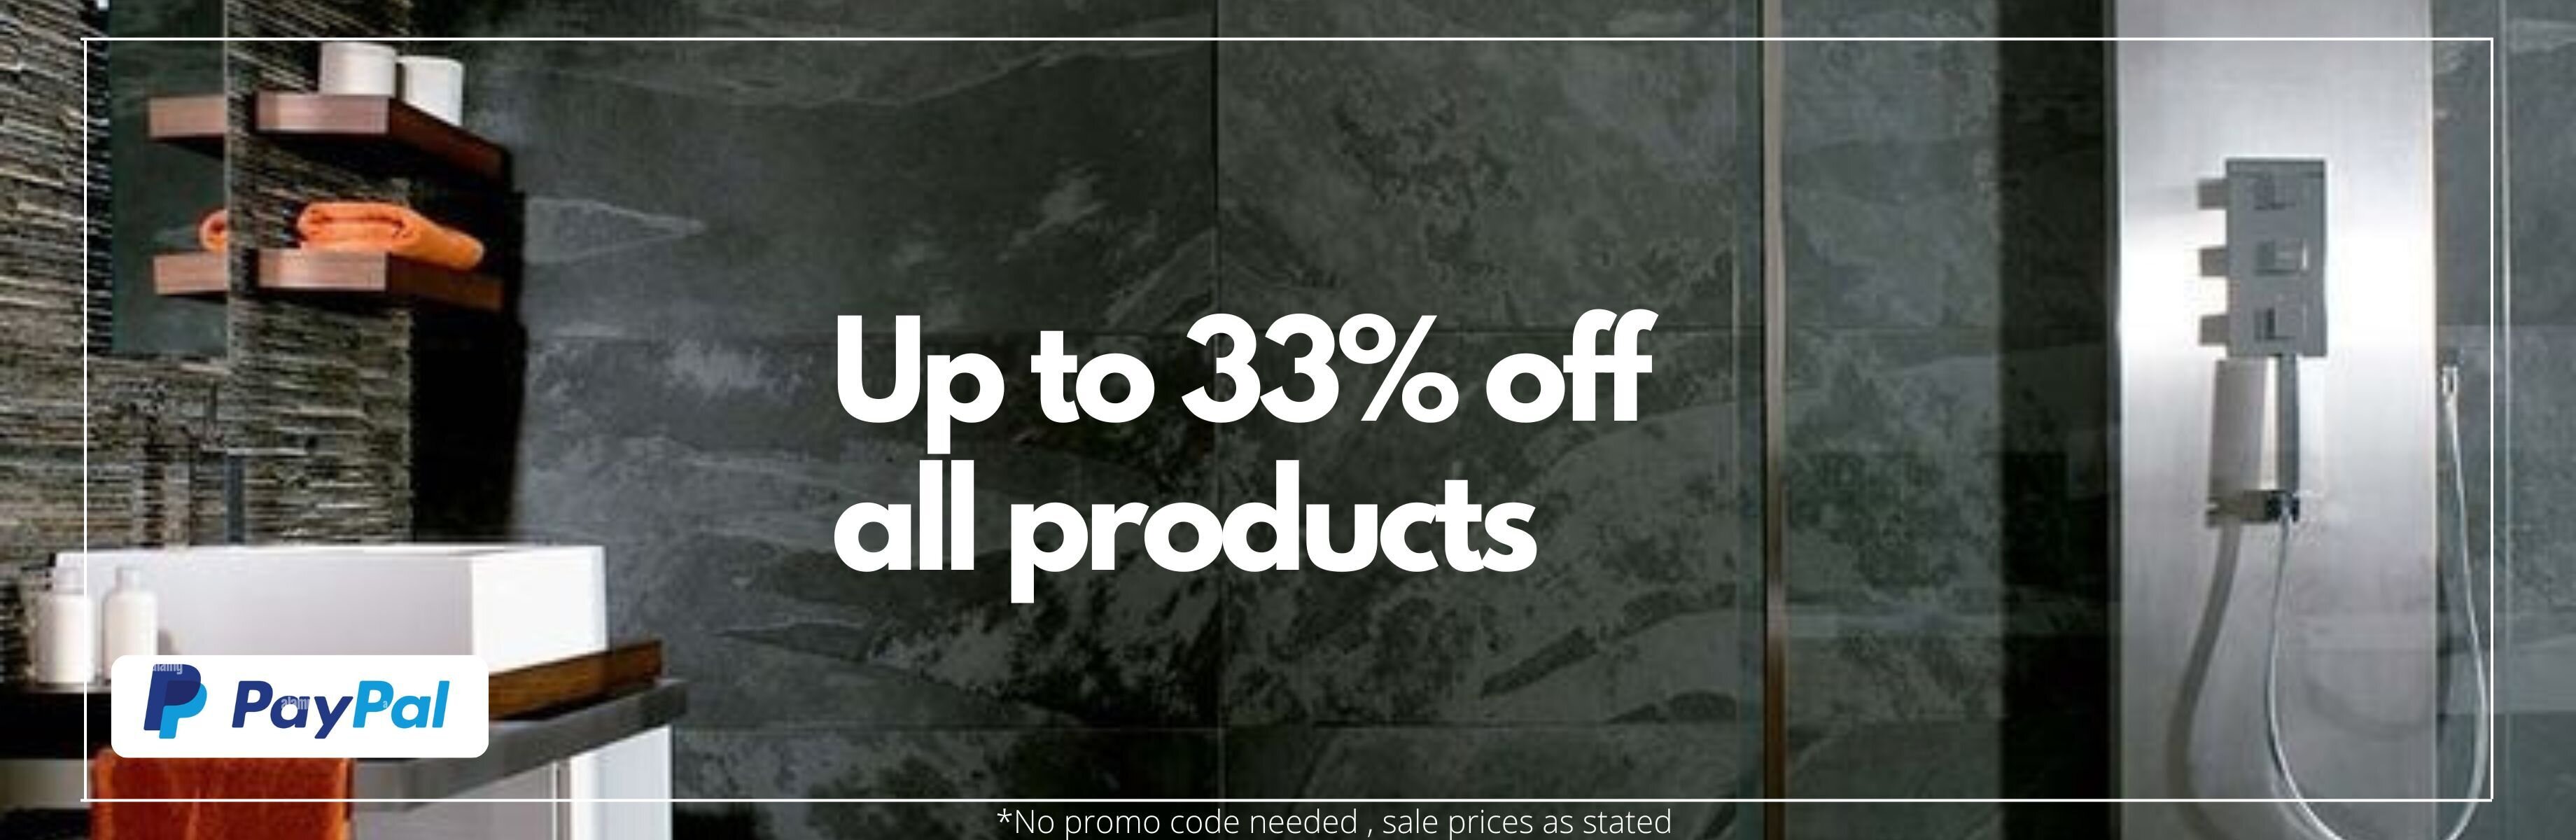 Up to 33% Off all products